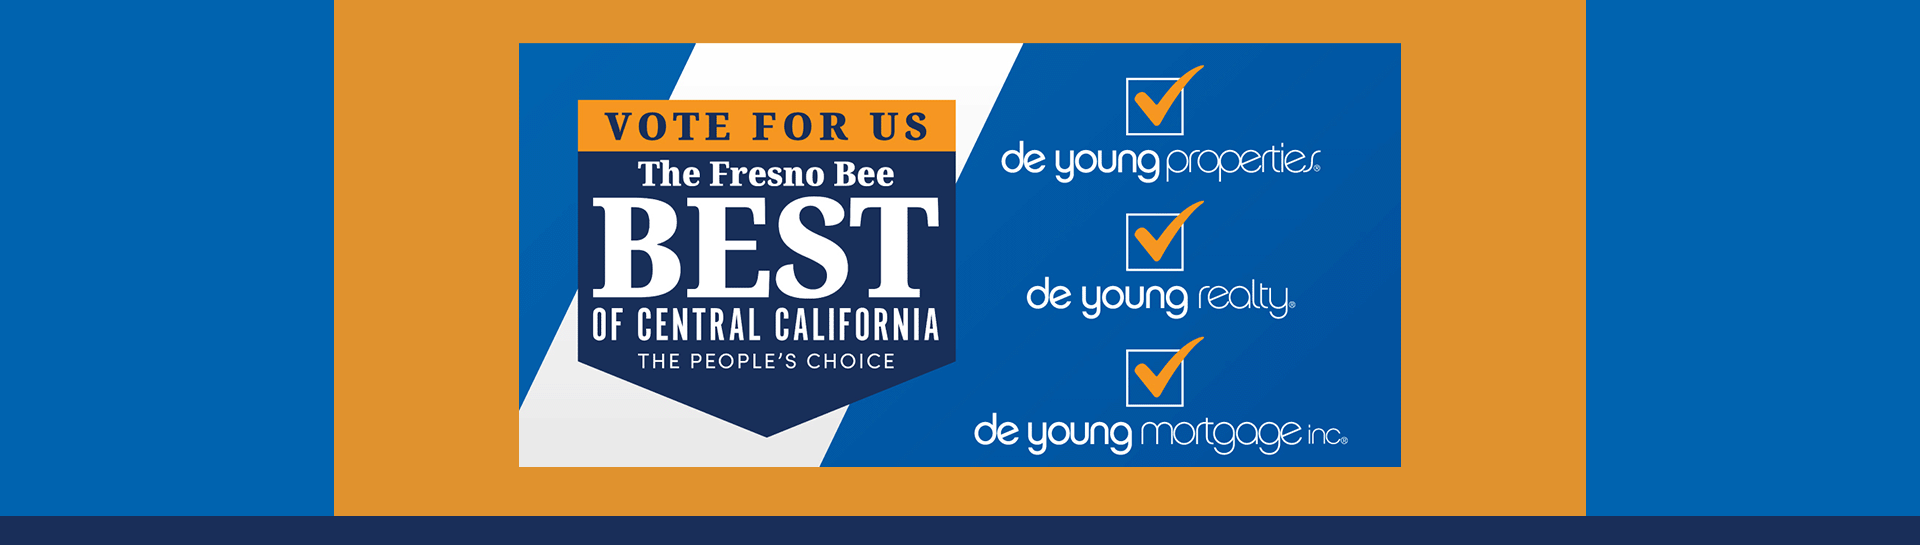 De Young Properties Would Appreciate Your Vote In The 2022 Fresno Bee Best Of Central California